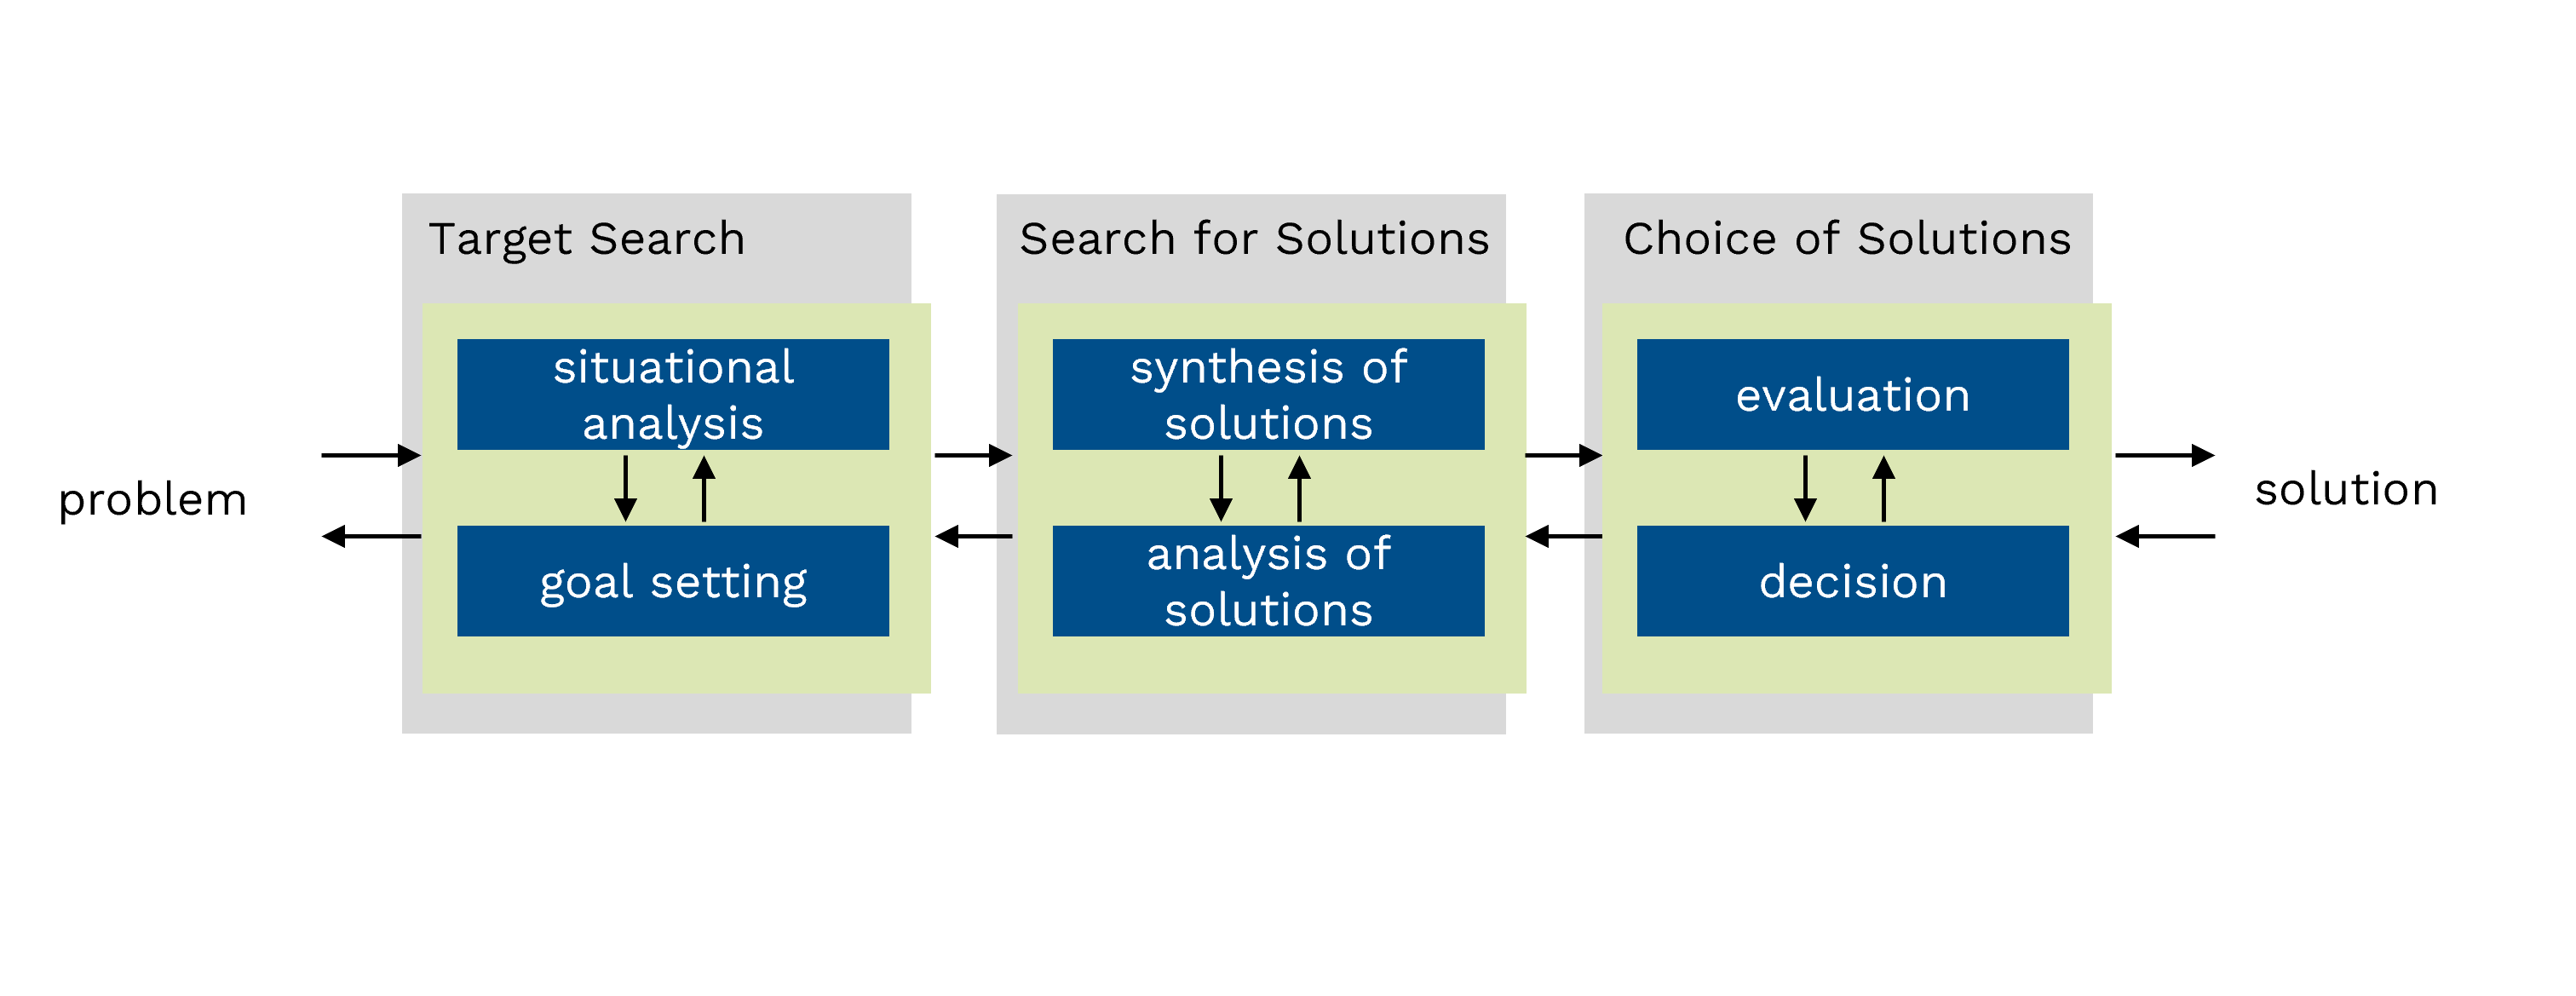 The figure shows the generic problem solving process following VDI 2221 part 1.